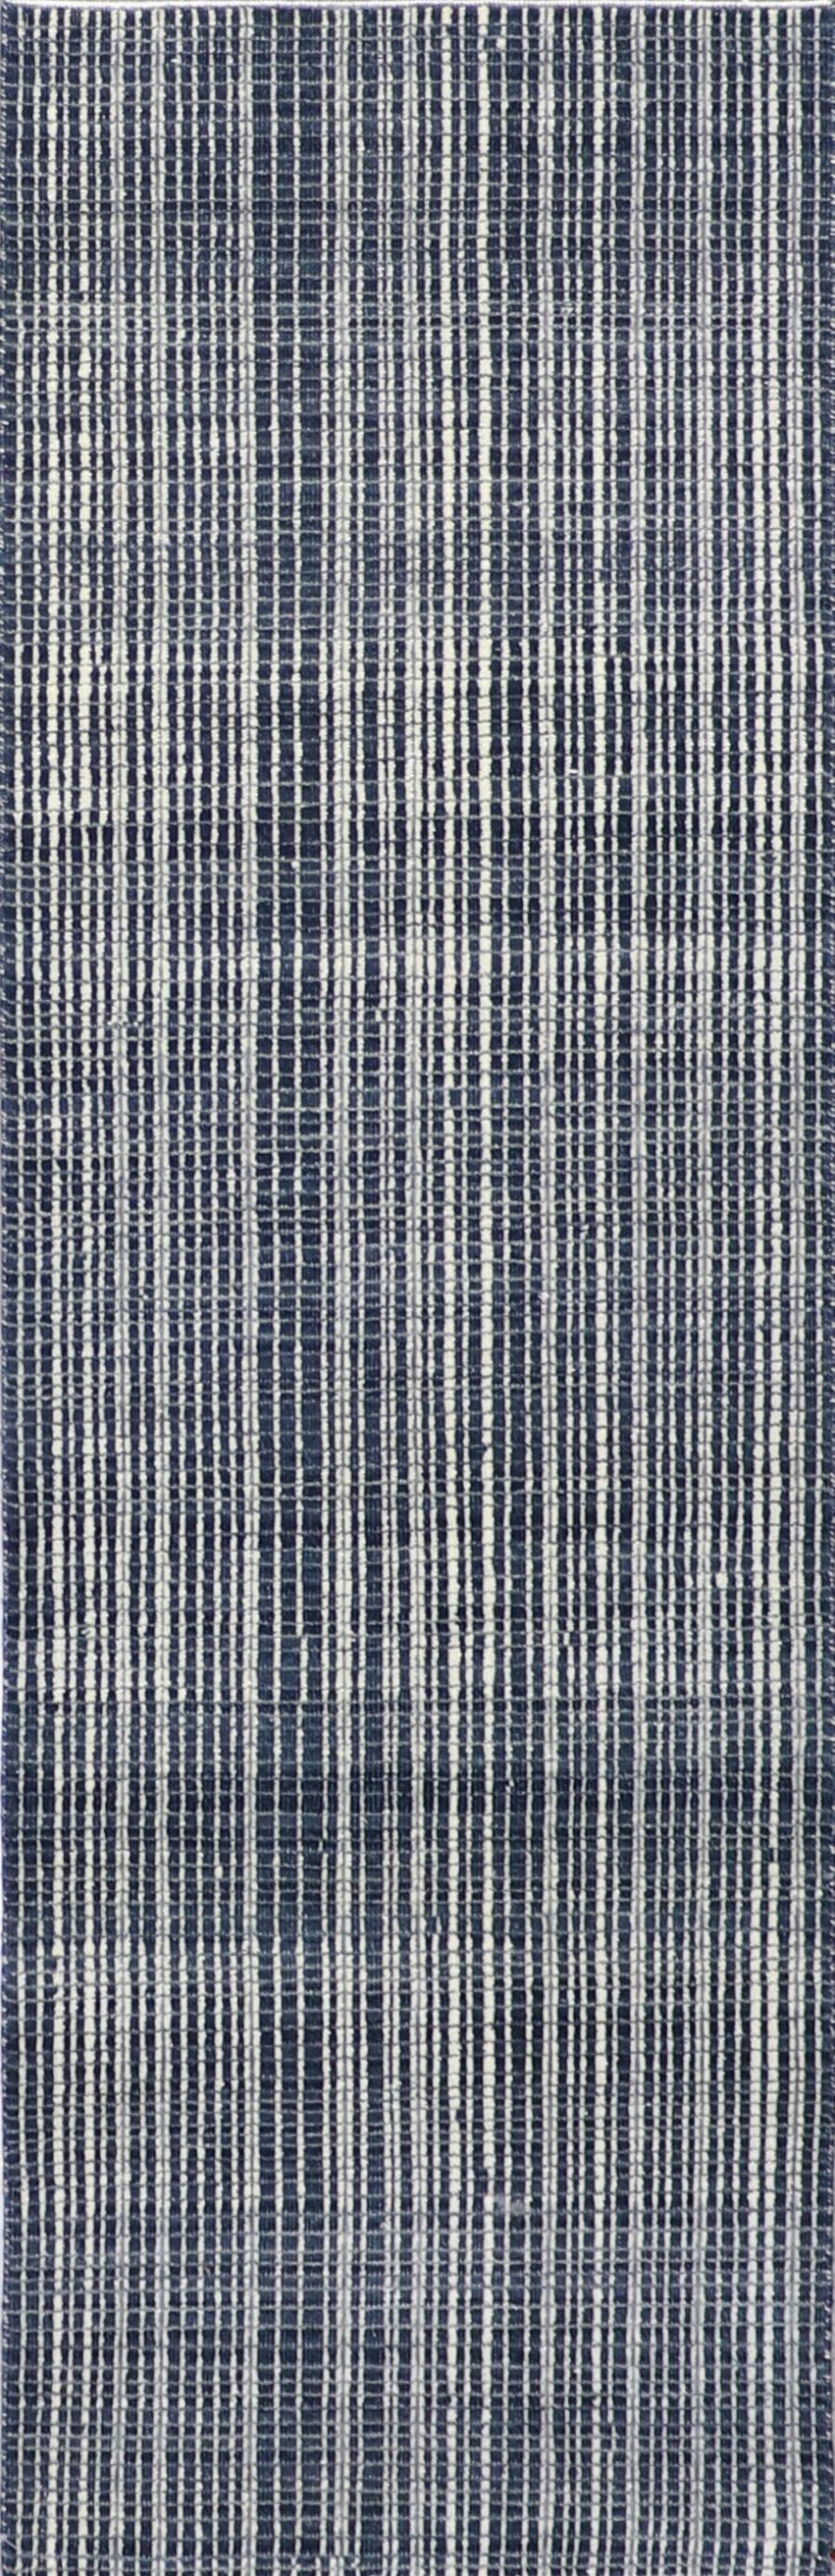 2’7”x7’11” Contemporary Navy Wool Hand-Knotted Rug - Direct Rug Import | Rugs in Chicago, Indiana,South Bend,Granger